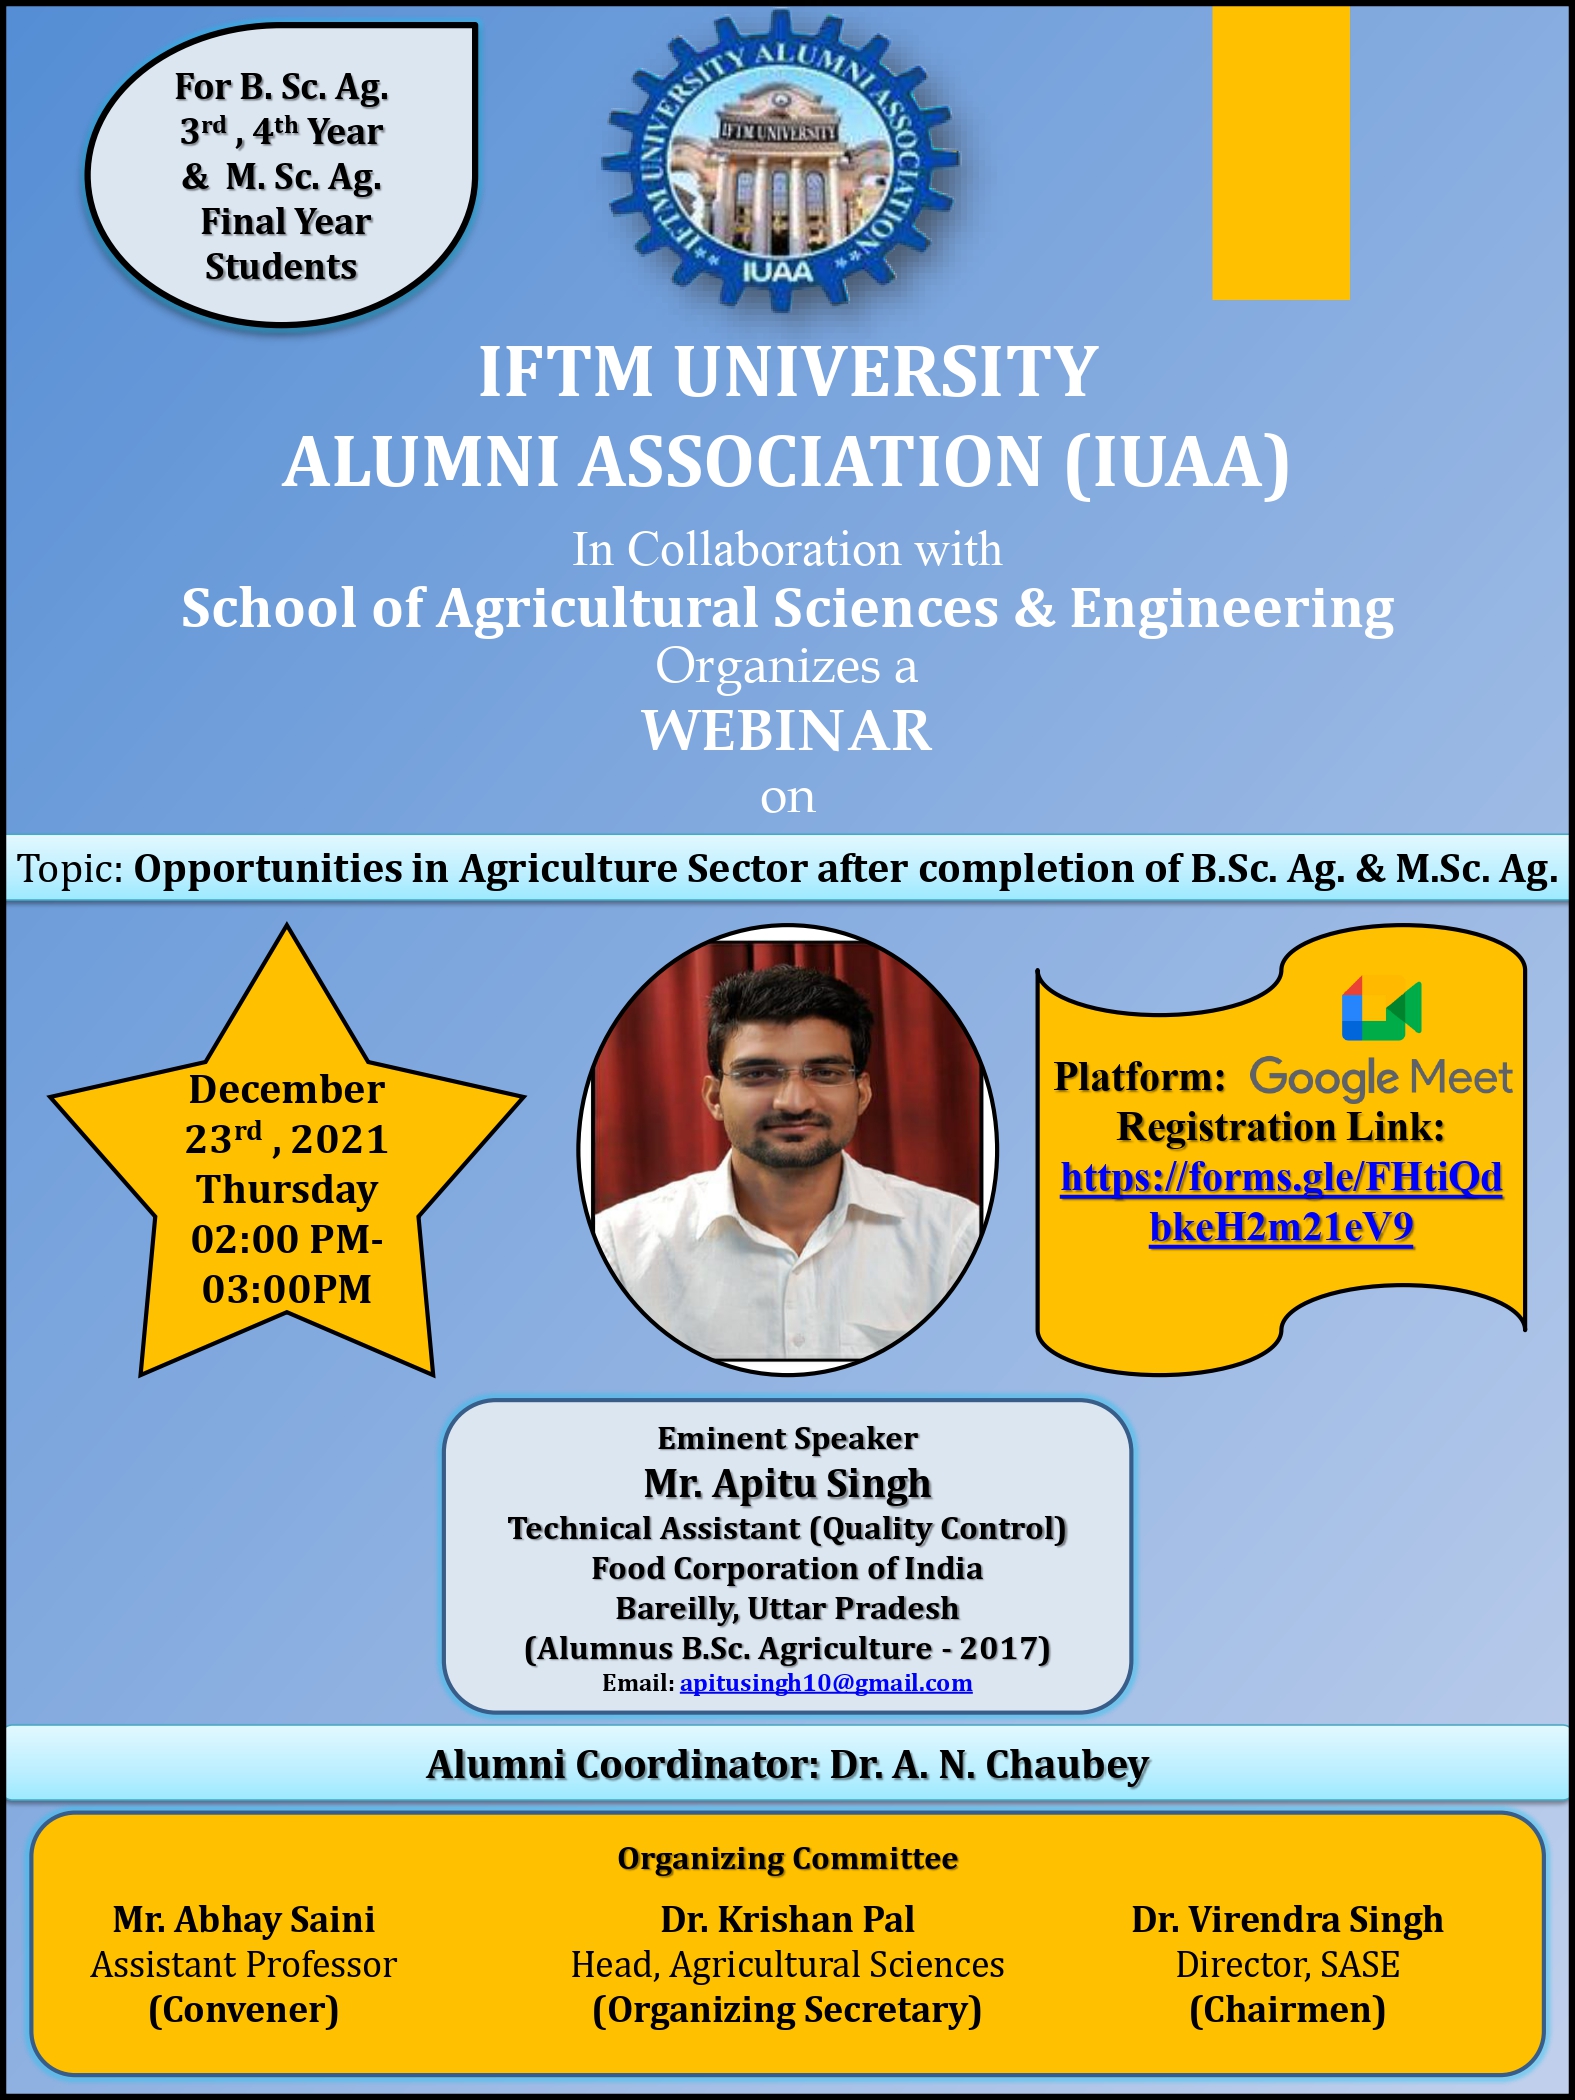 Webinar on Opportunities in Agriculture Sector after Completion of B.Sc. Ag. & M.SC. Ag